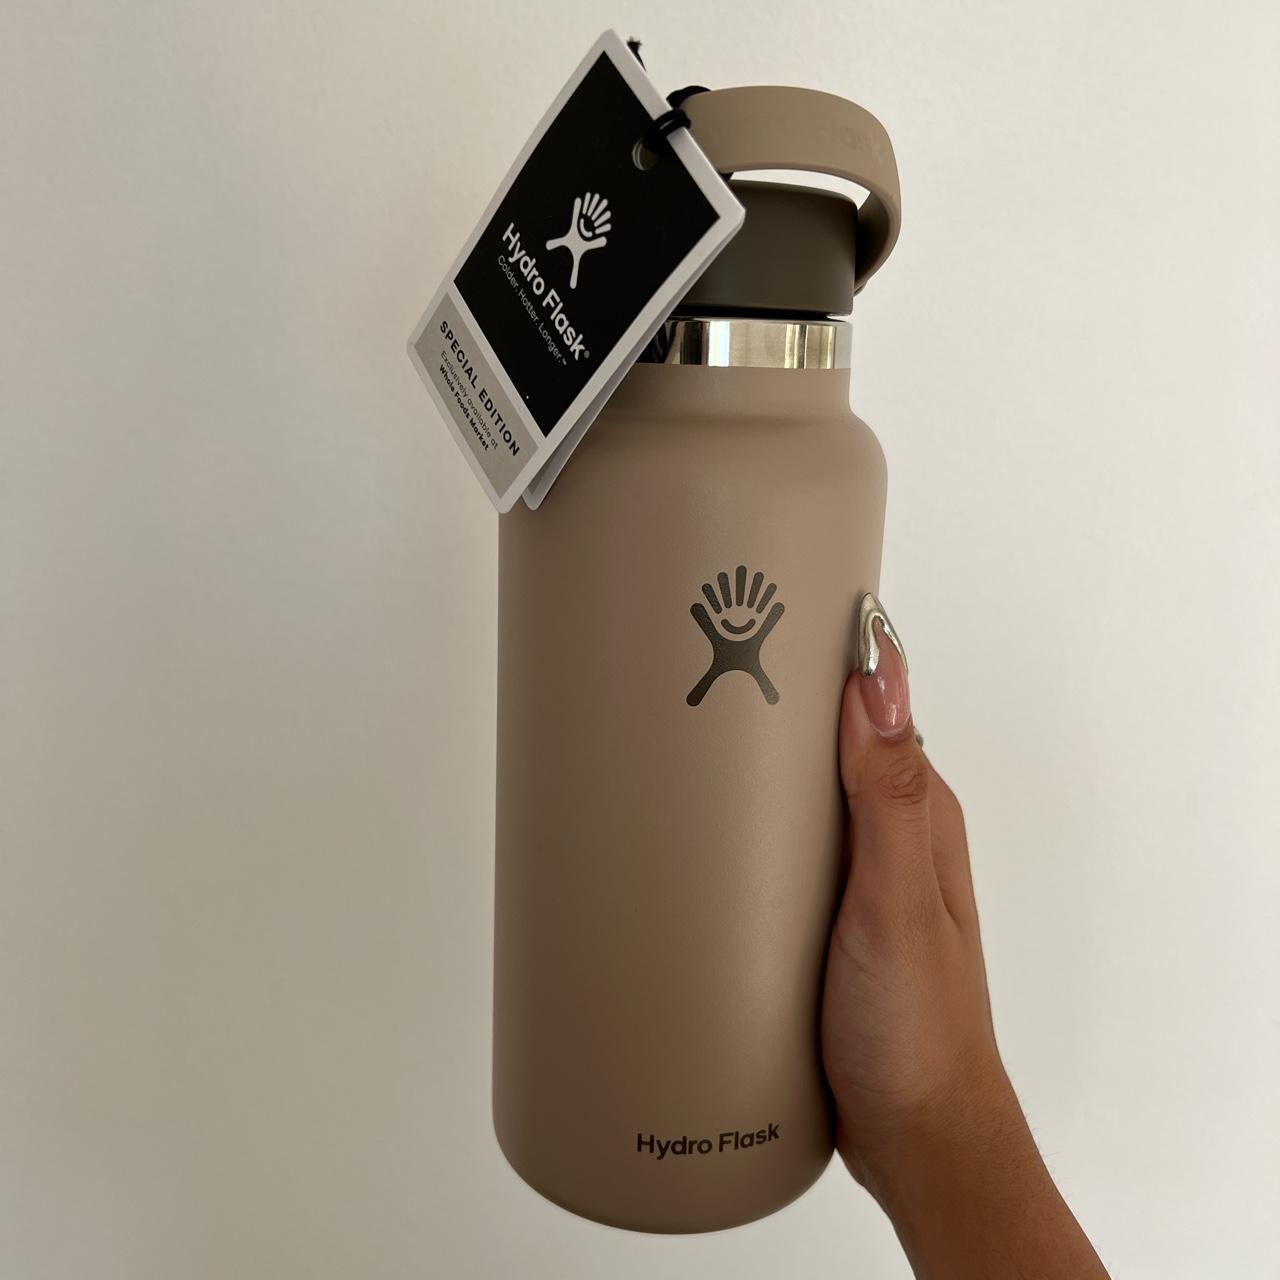 whole foods taproot limited edition hydroflask